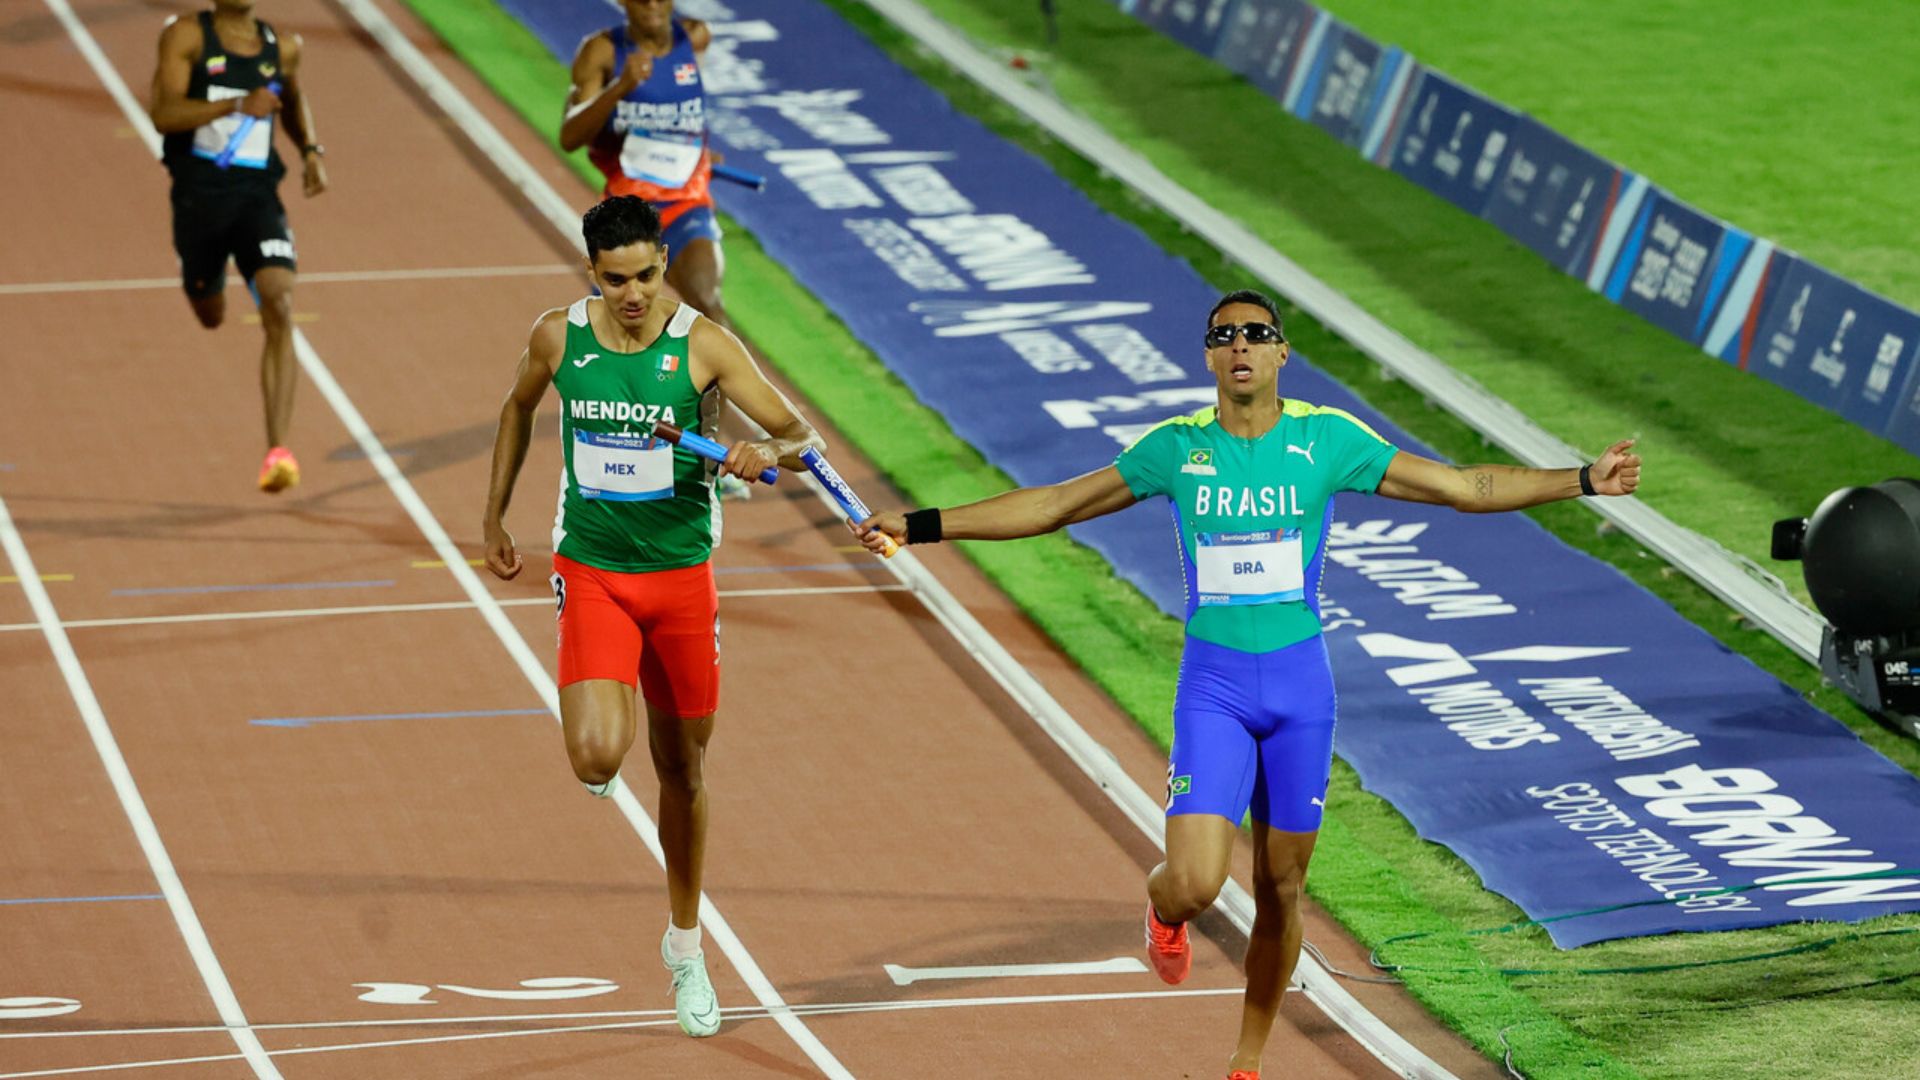 Brazil Secures Gold in Male's 4x400 Relay